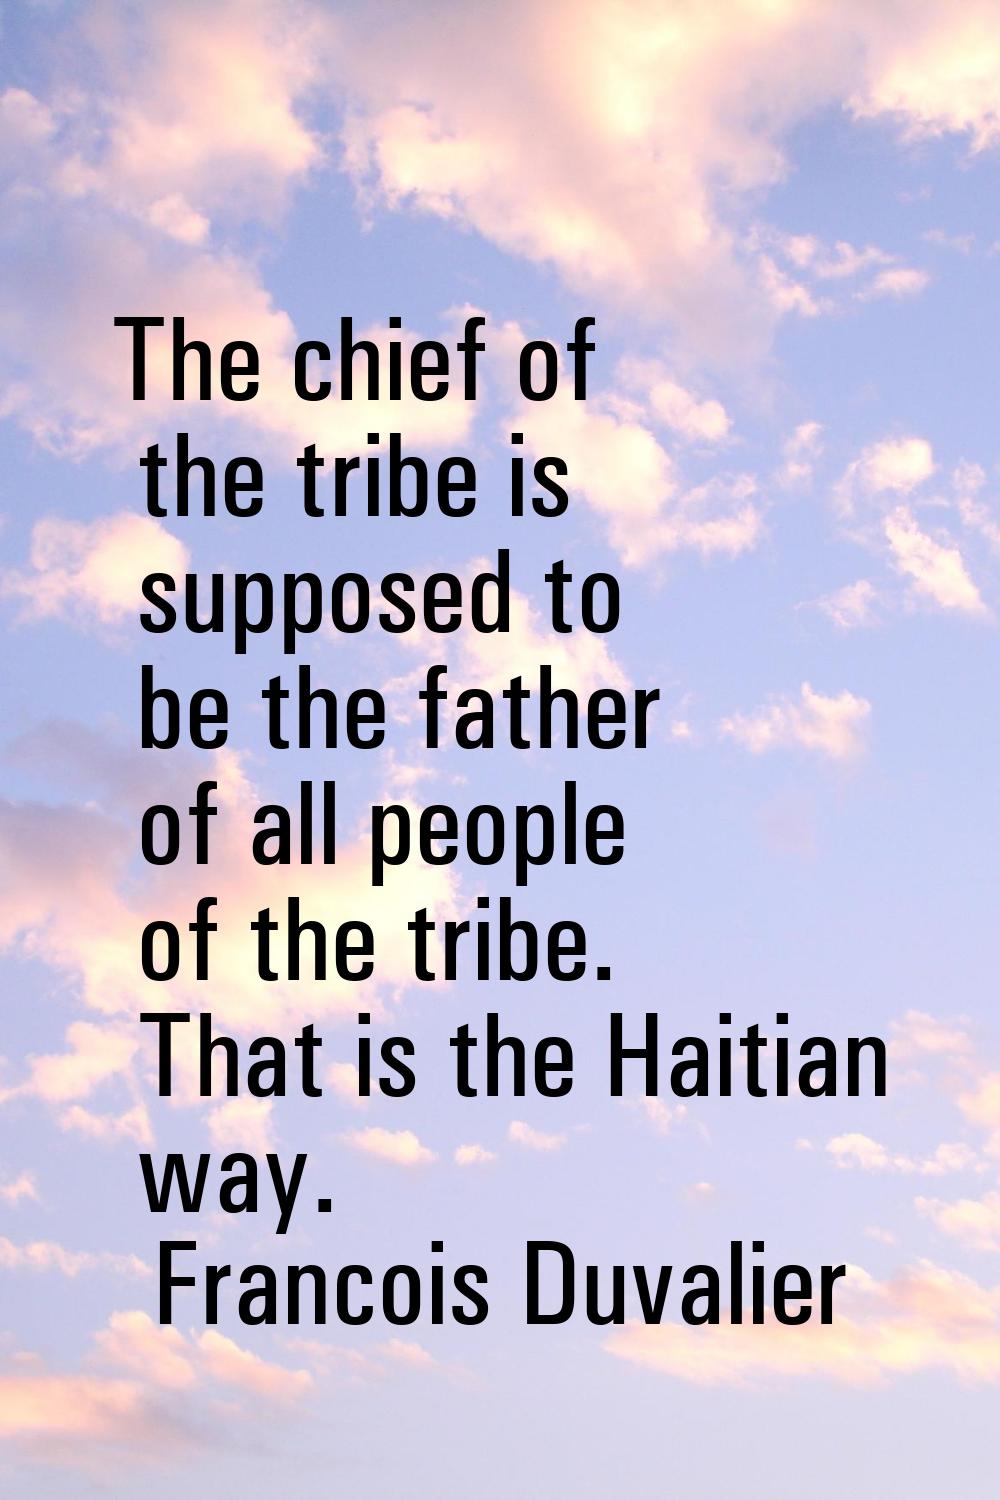 The chief of the tribe is supposed to be the father of all people of the tribe. That is the Haitian